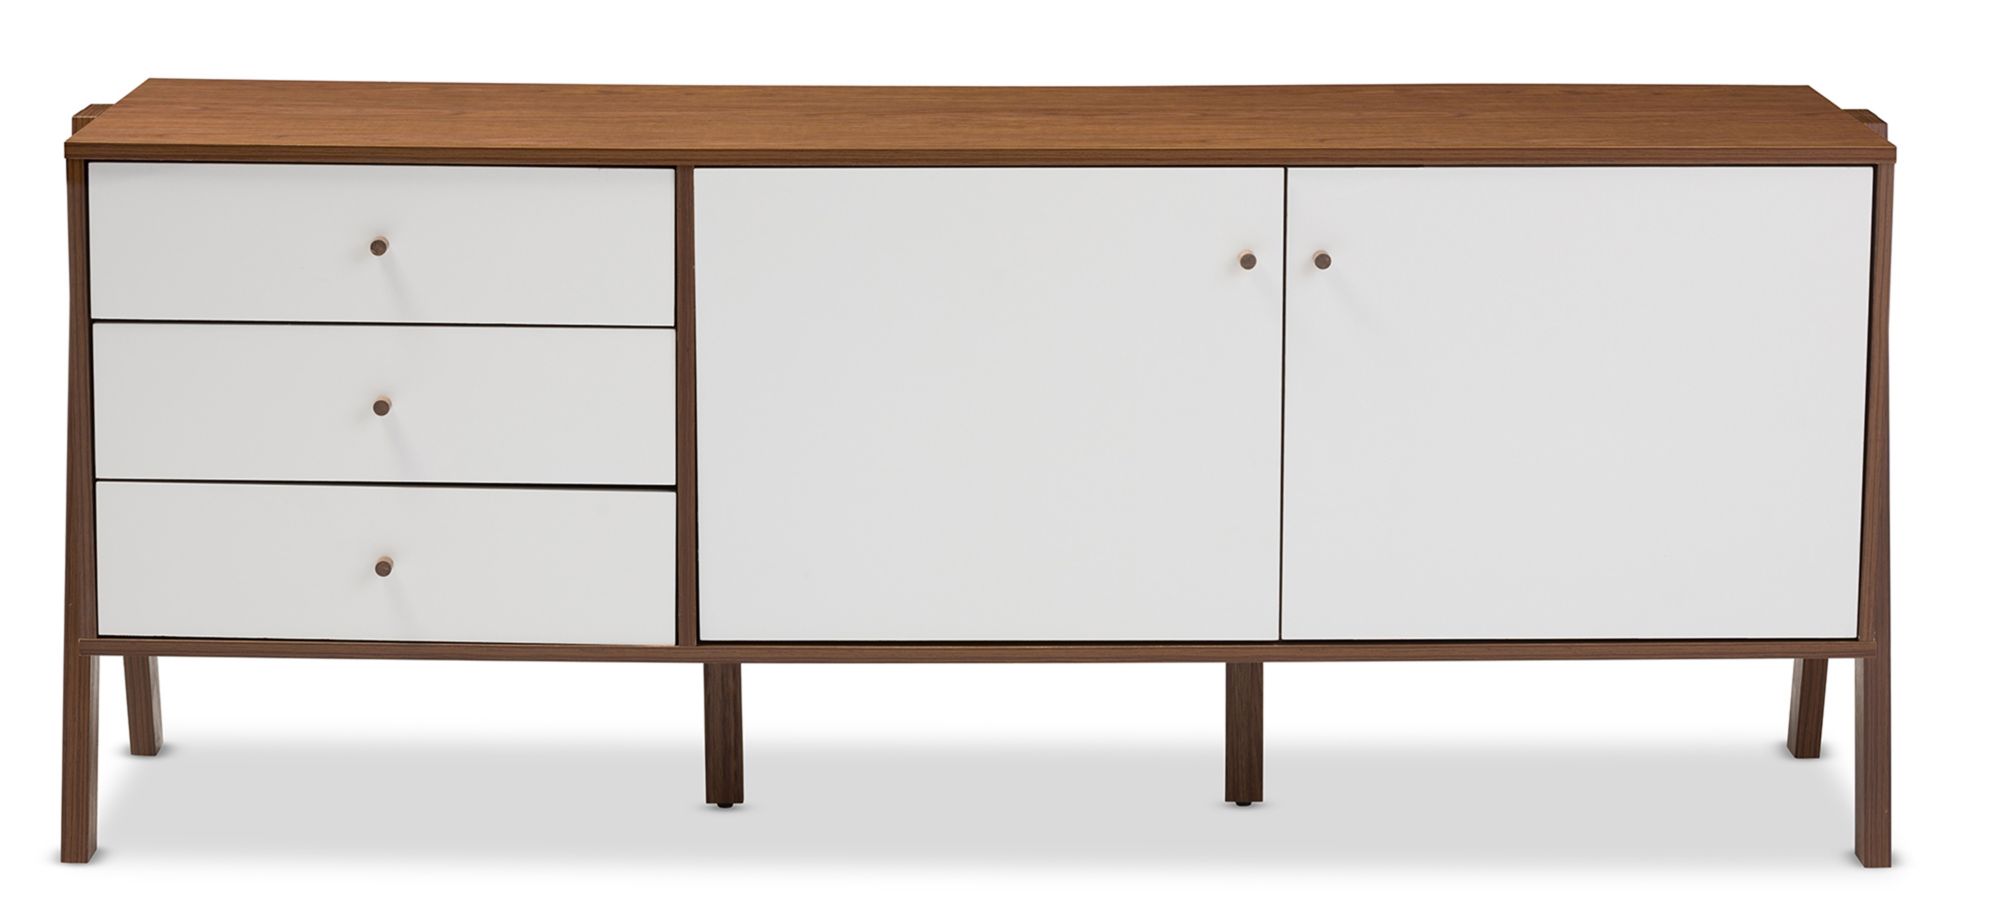 Harlow Sideboard Storage Cabinet in "Walnut" Brown/White by Wholesale Interiors